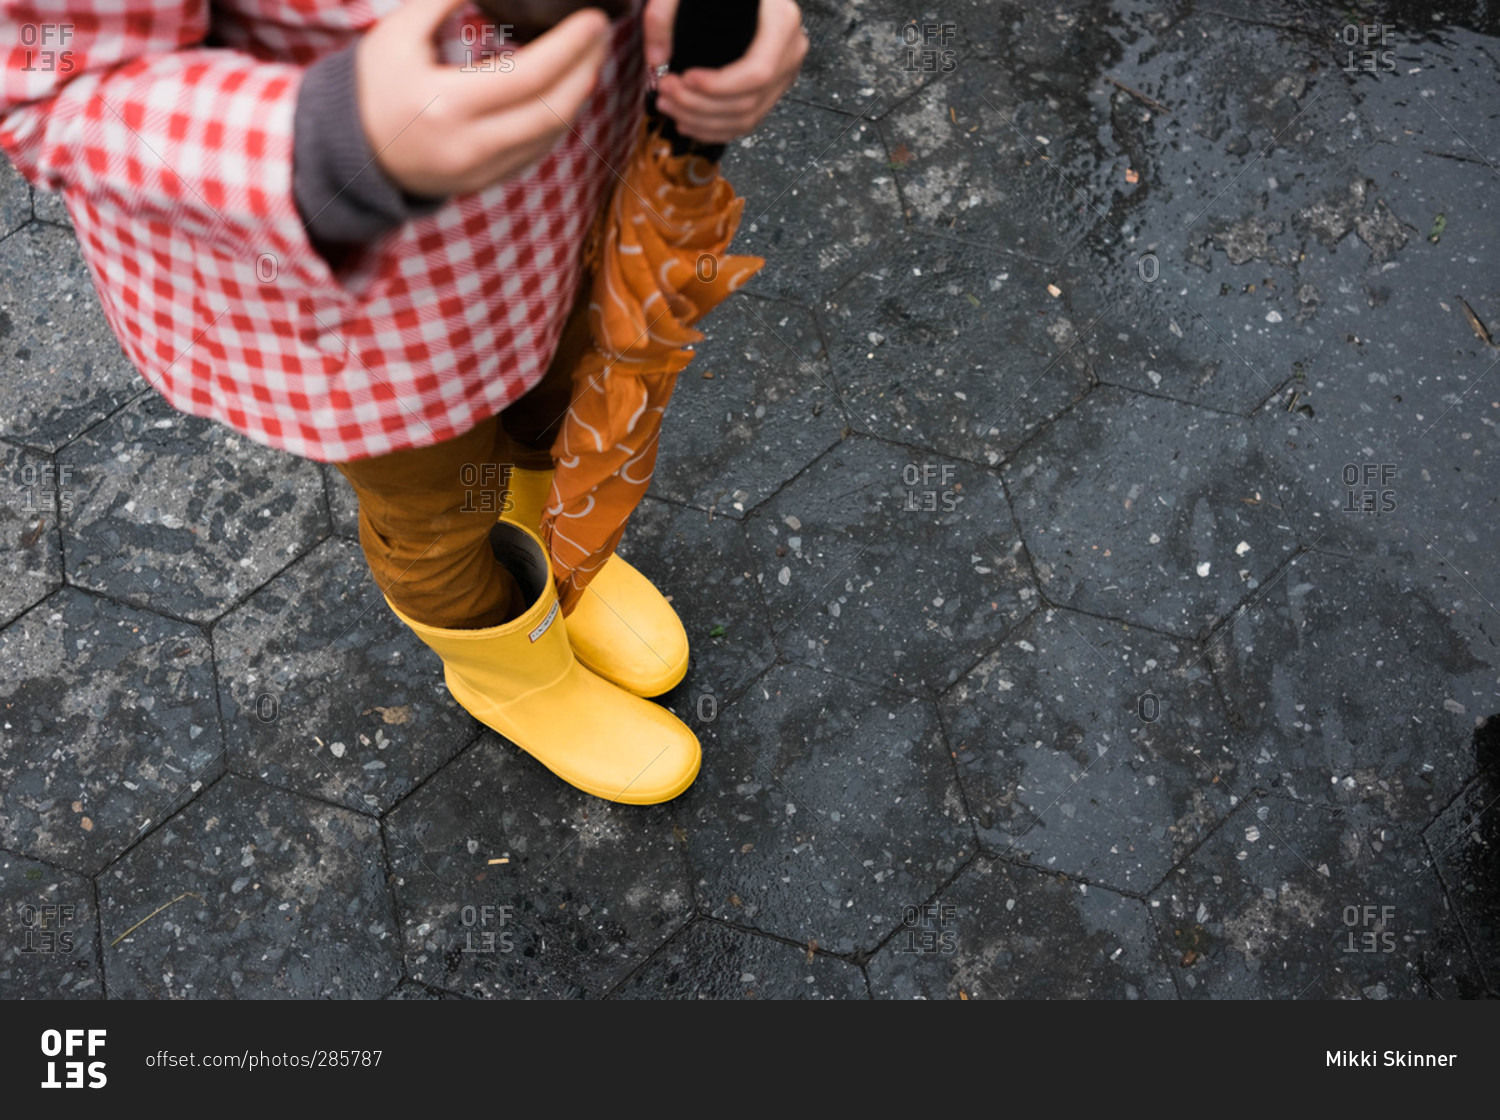 Girl with rain gear standing on pavement